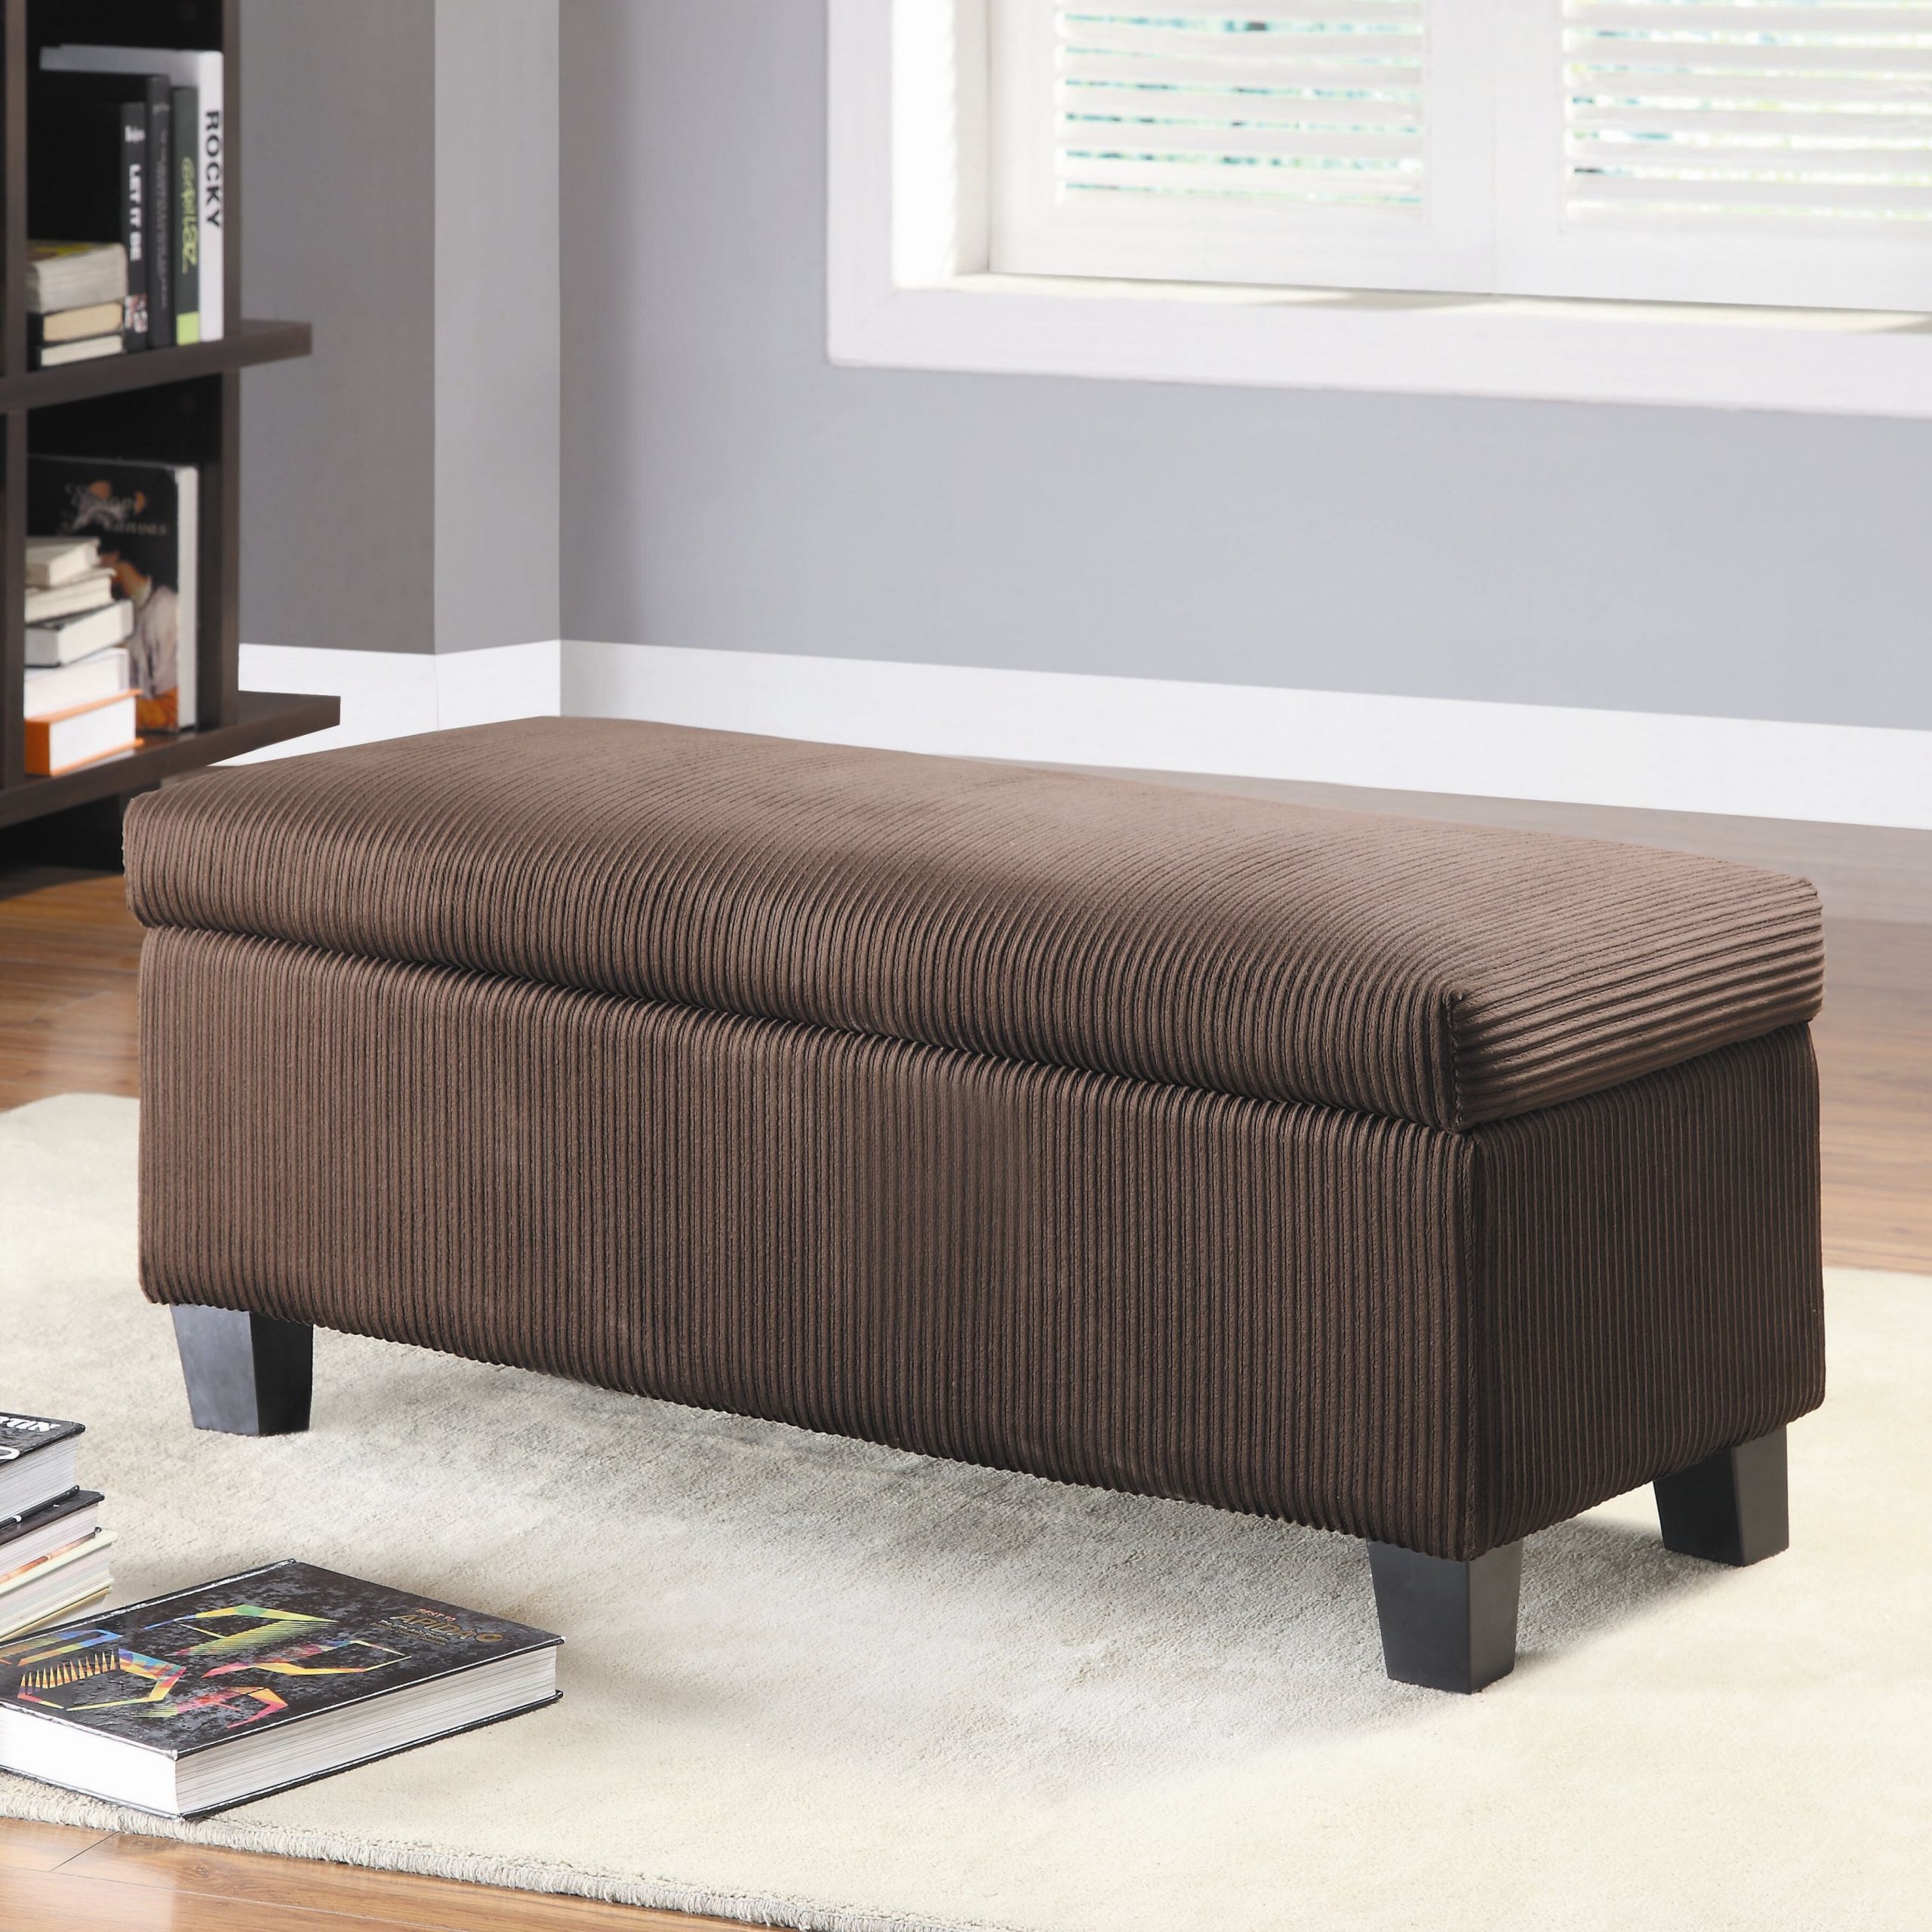 Storage Ottoman For Bedroom
 Clair New Fabric Bedroom Storage Ottoman